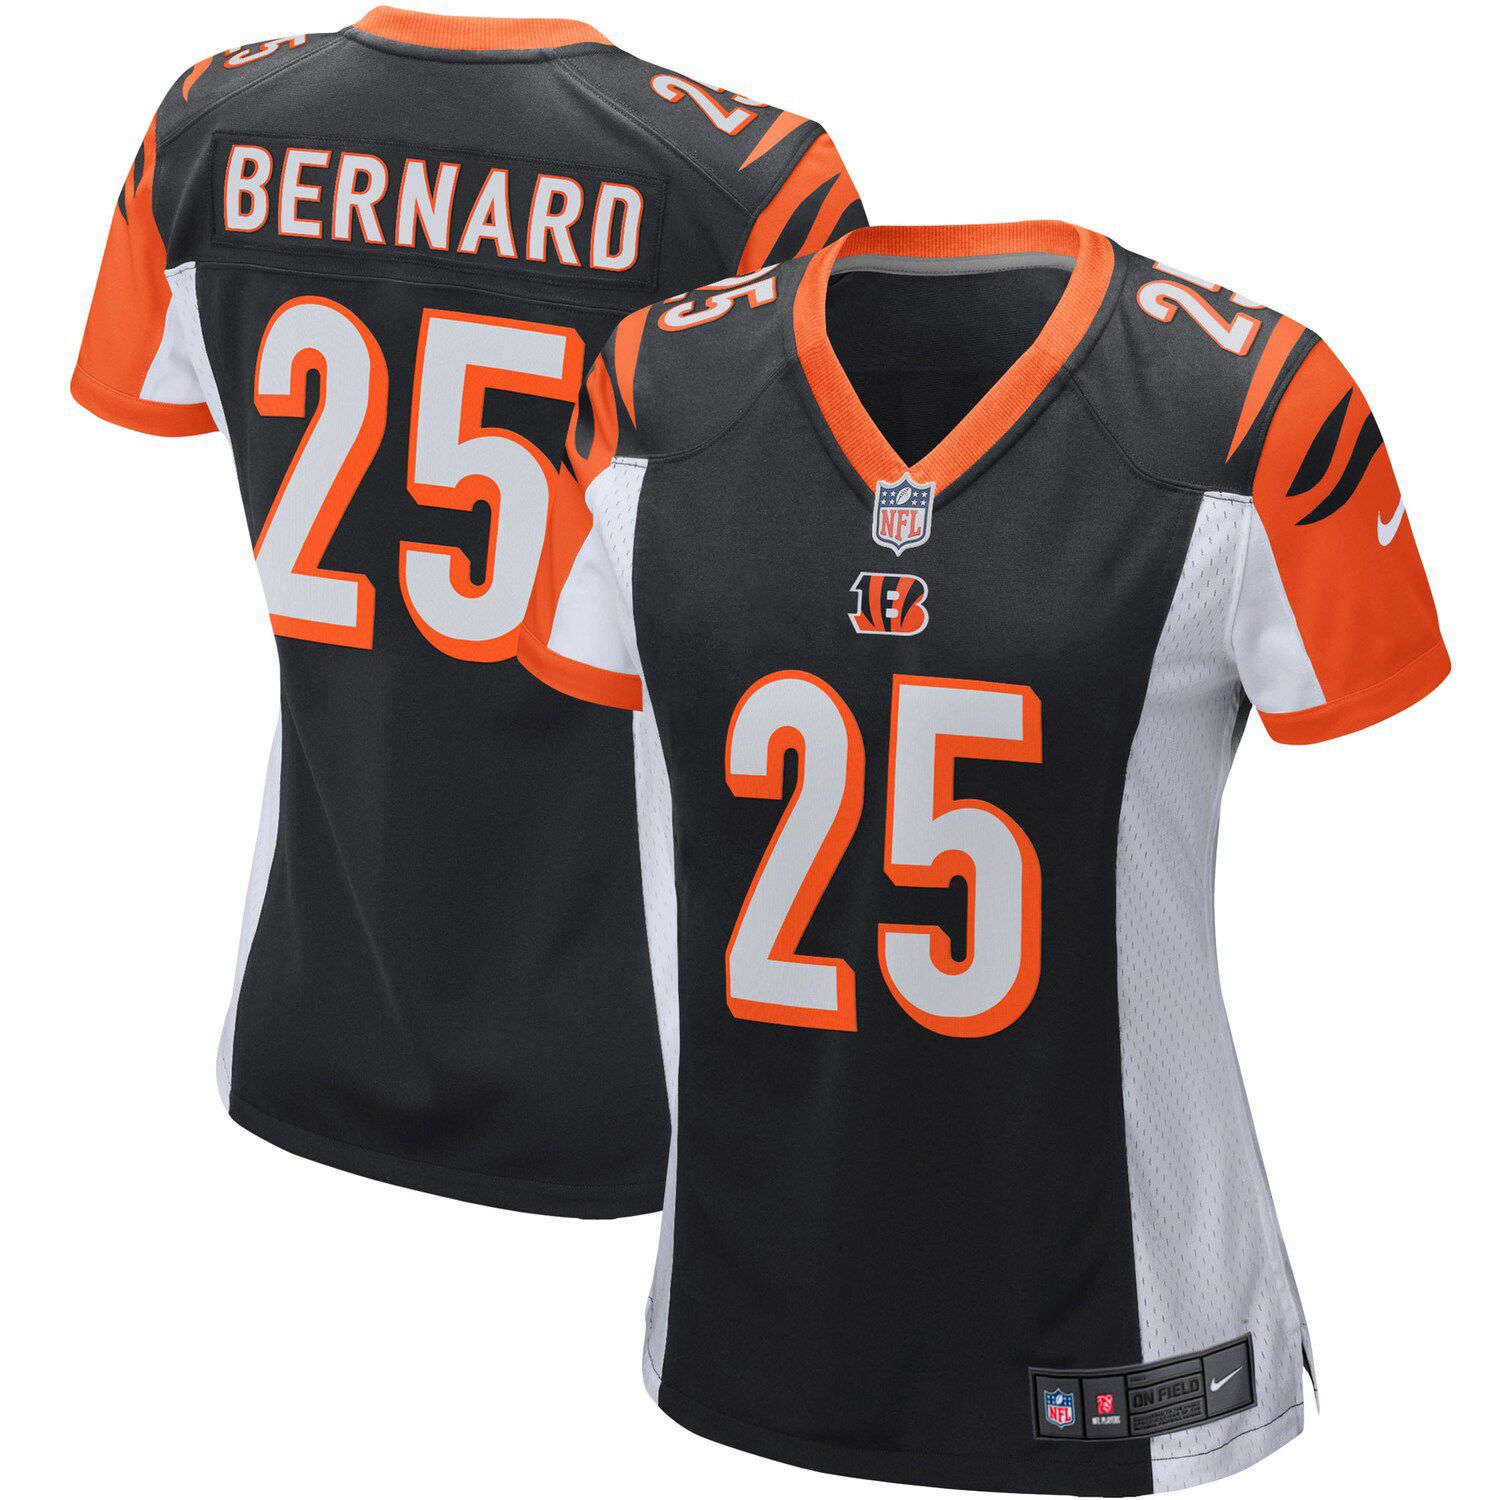 bengals official jersey